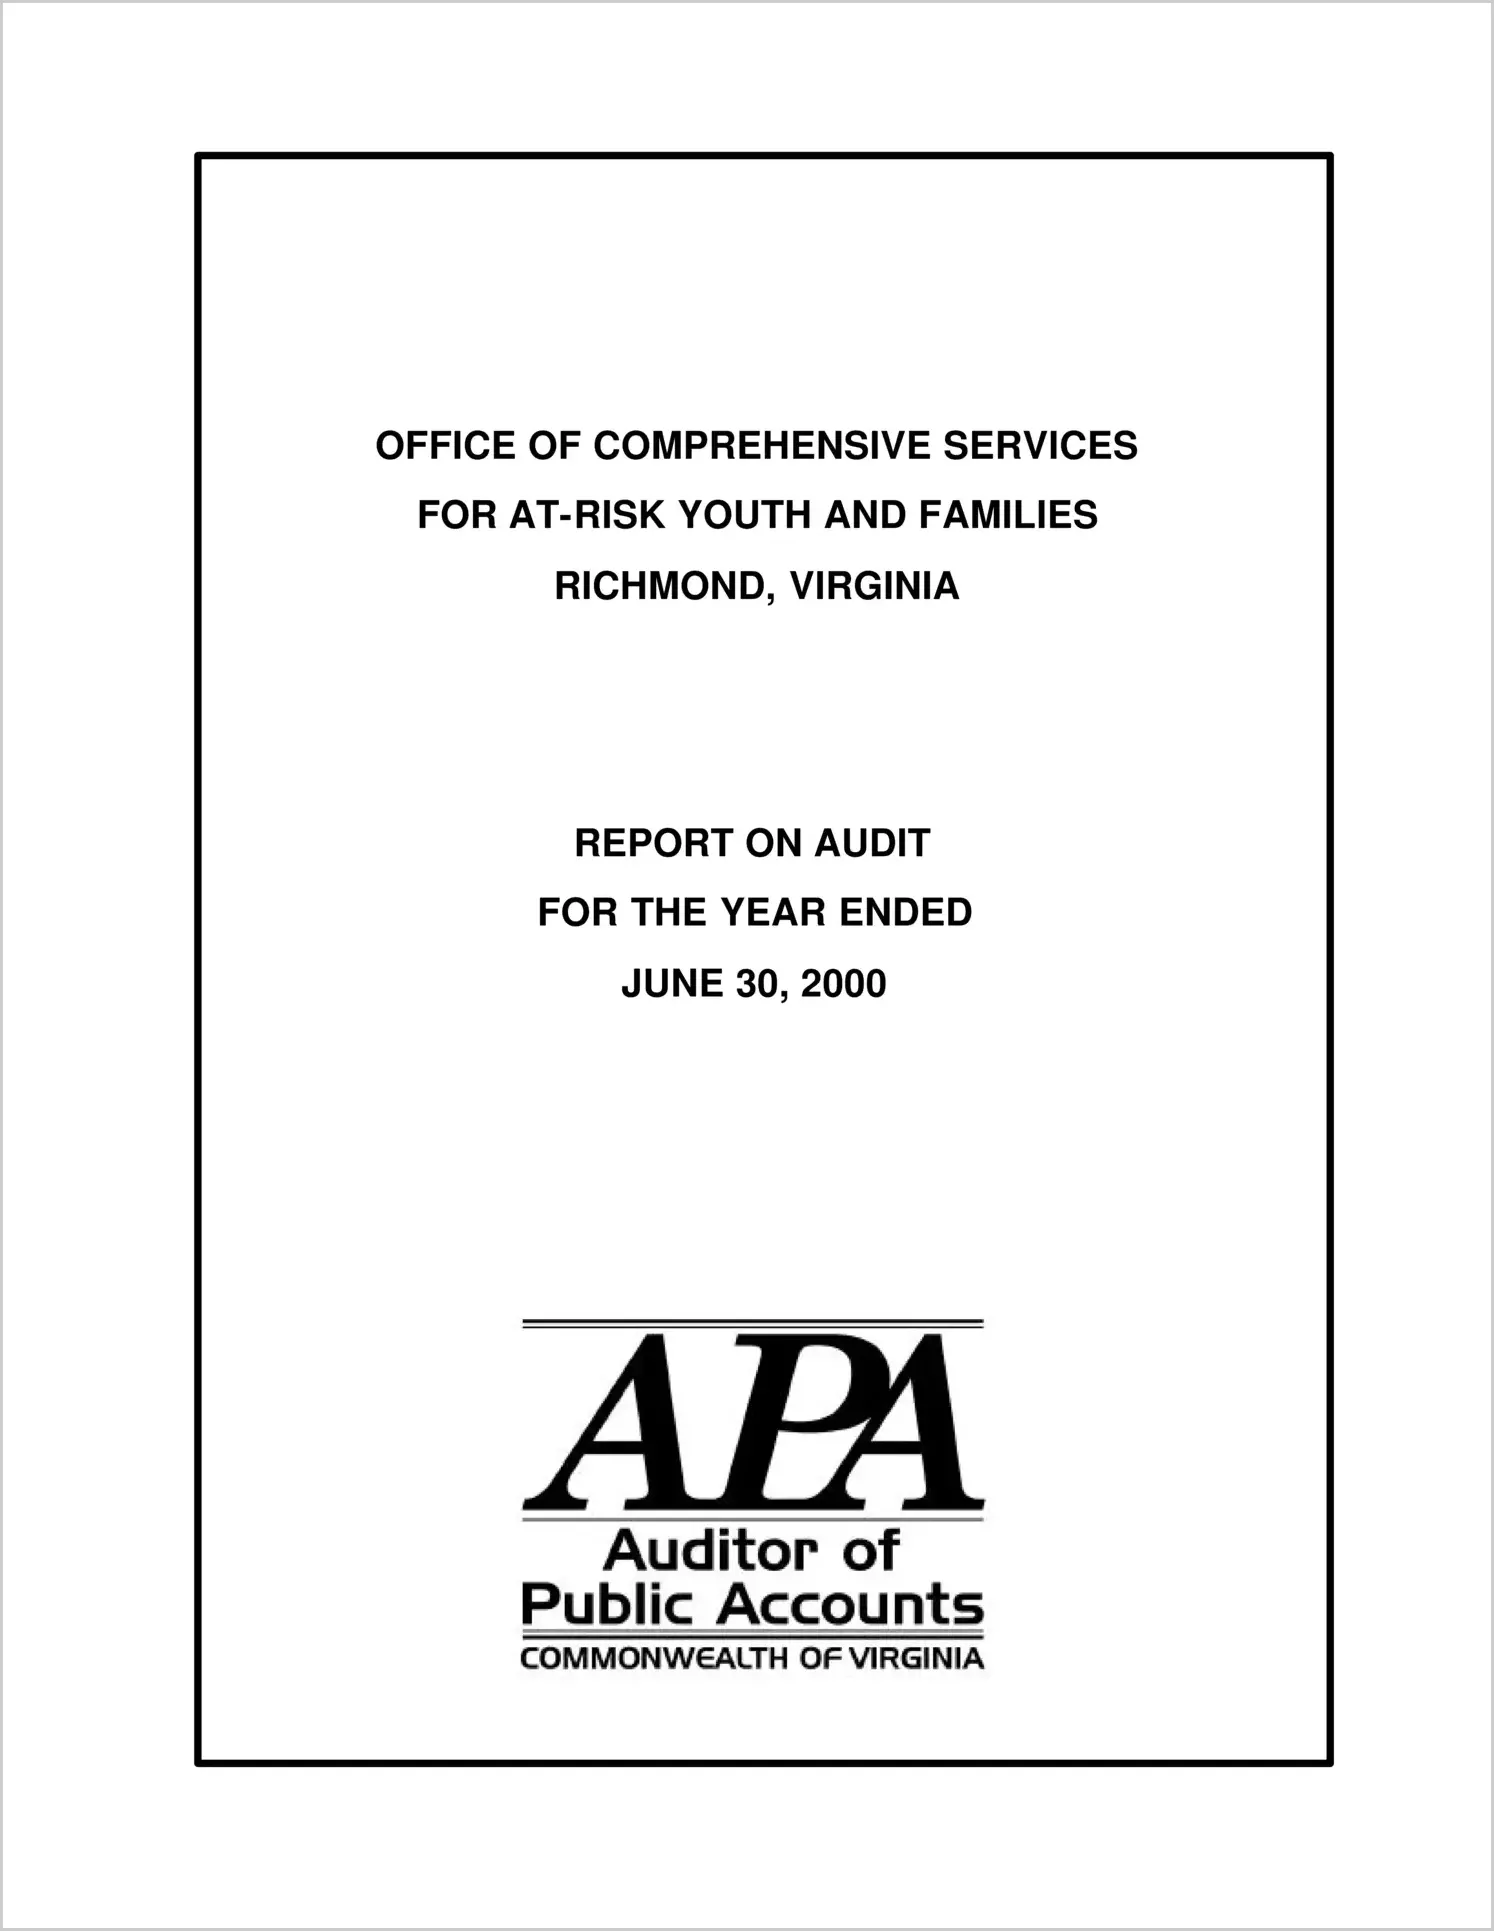 Office of Comprehensive Services for At-Risk Youth and Families for the year ended June 30, 2000